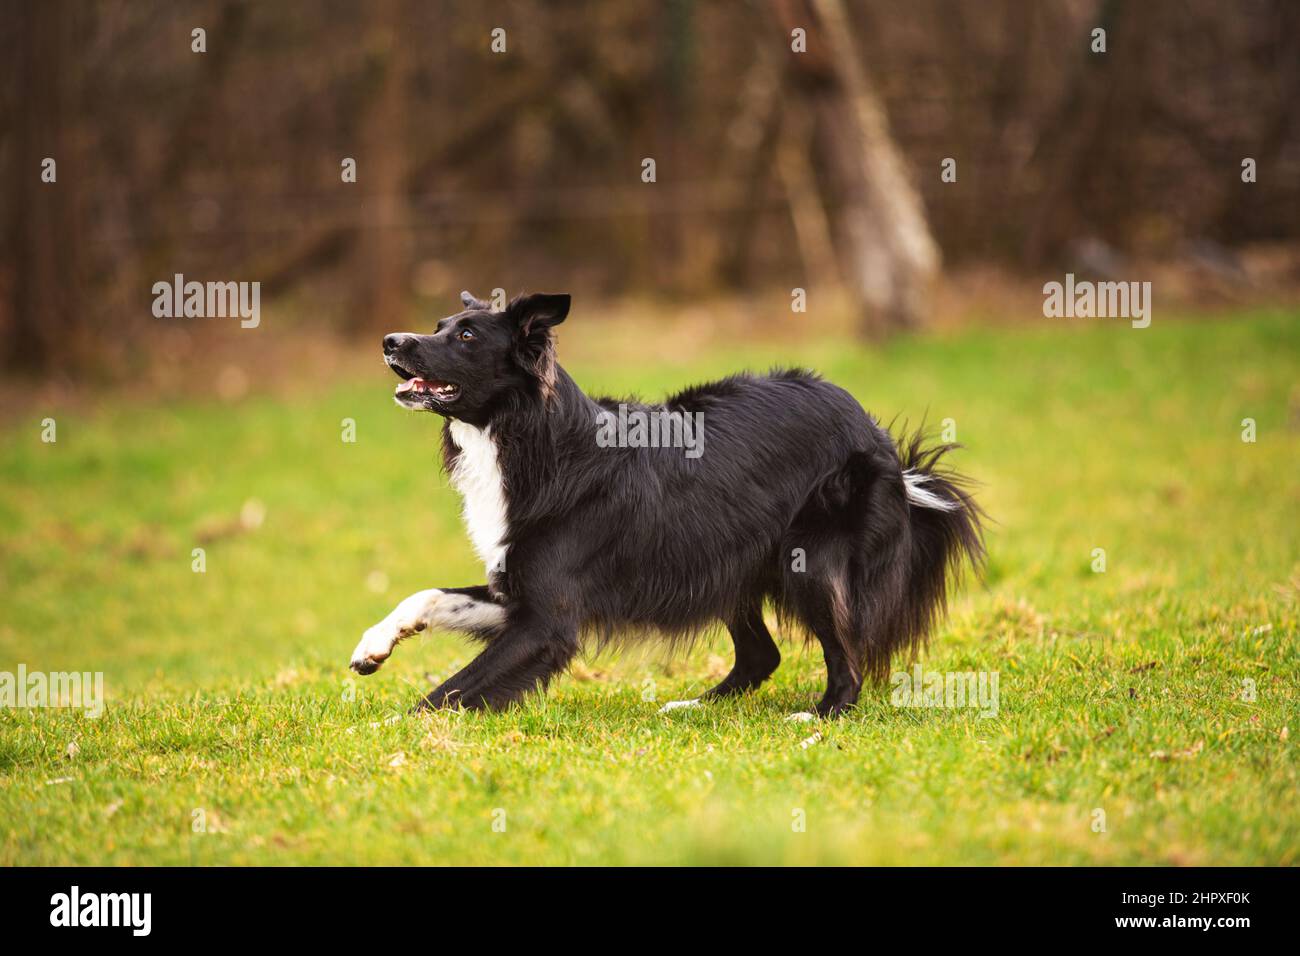 Playful full length purebred border collie dog funny face expression playing outdoors in the city park. Adorable attentive puppy ready to catch the fl Stock Photo